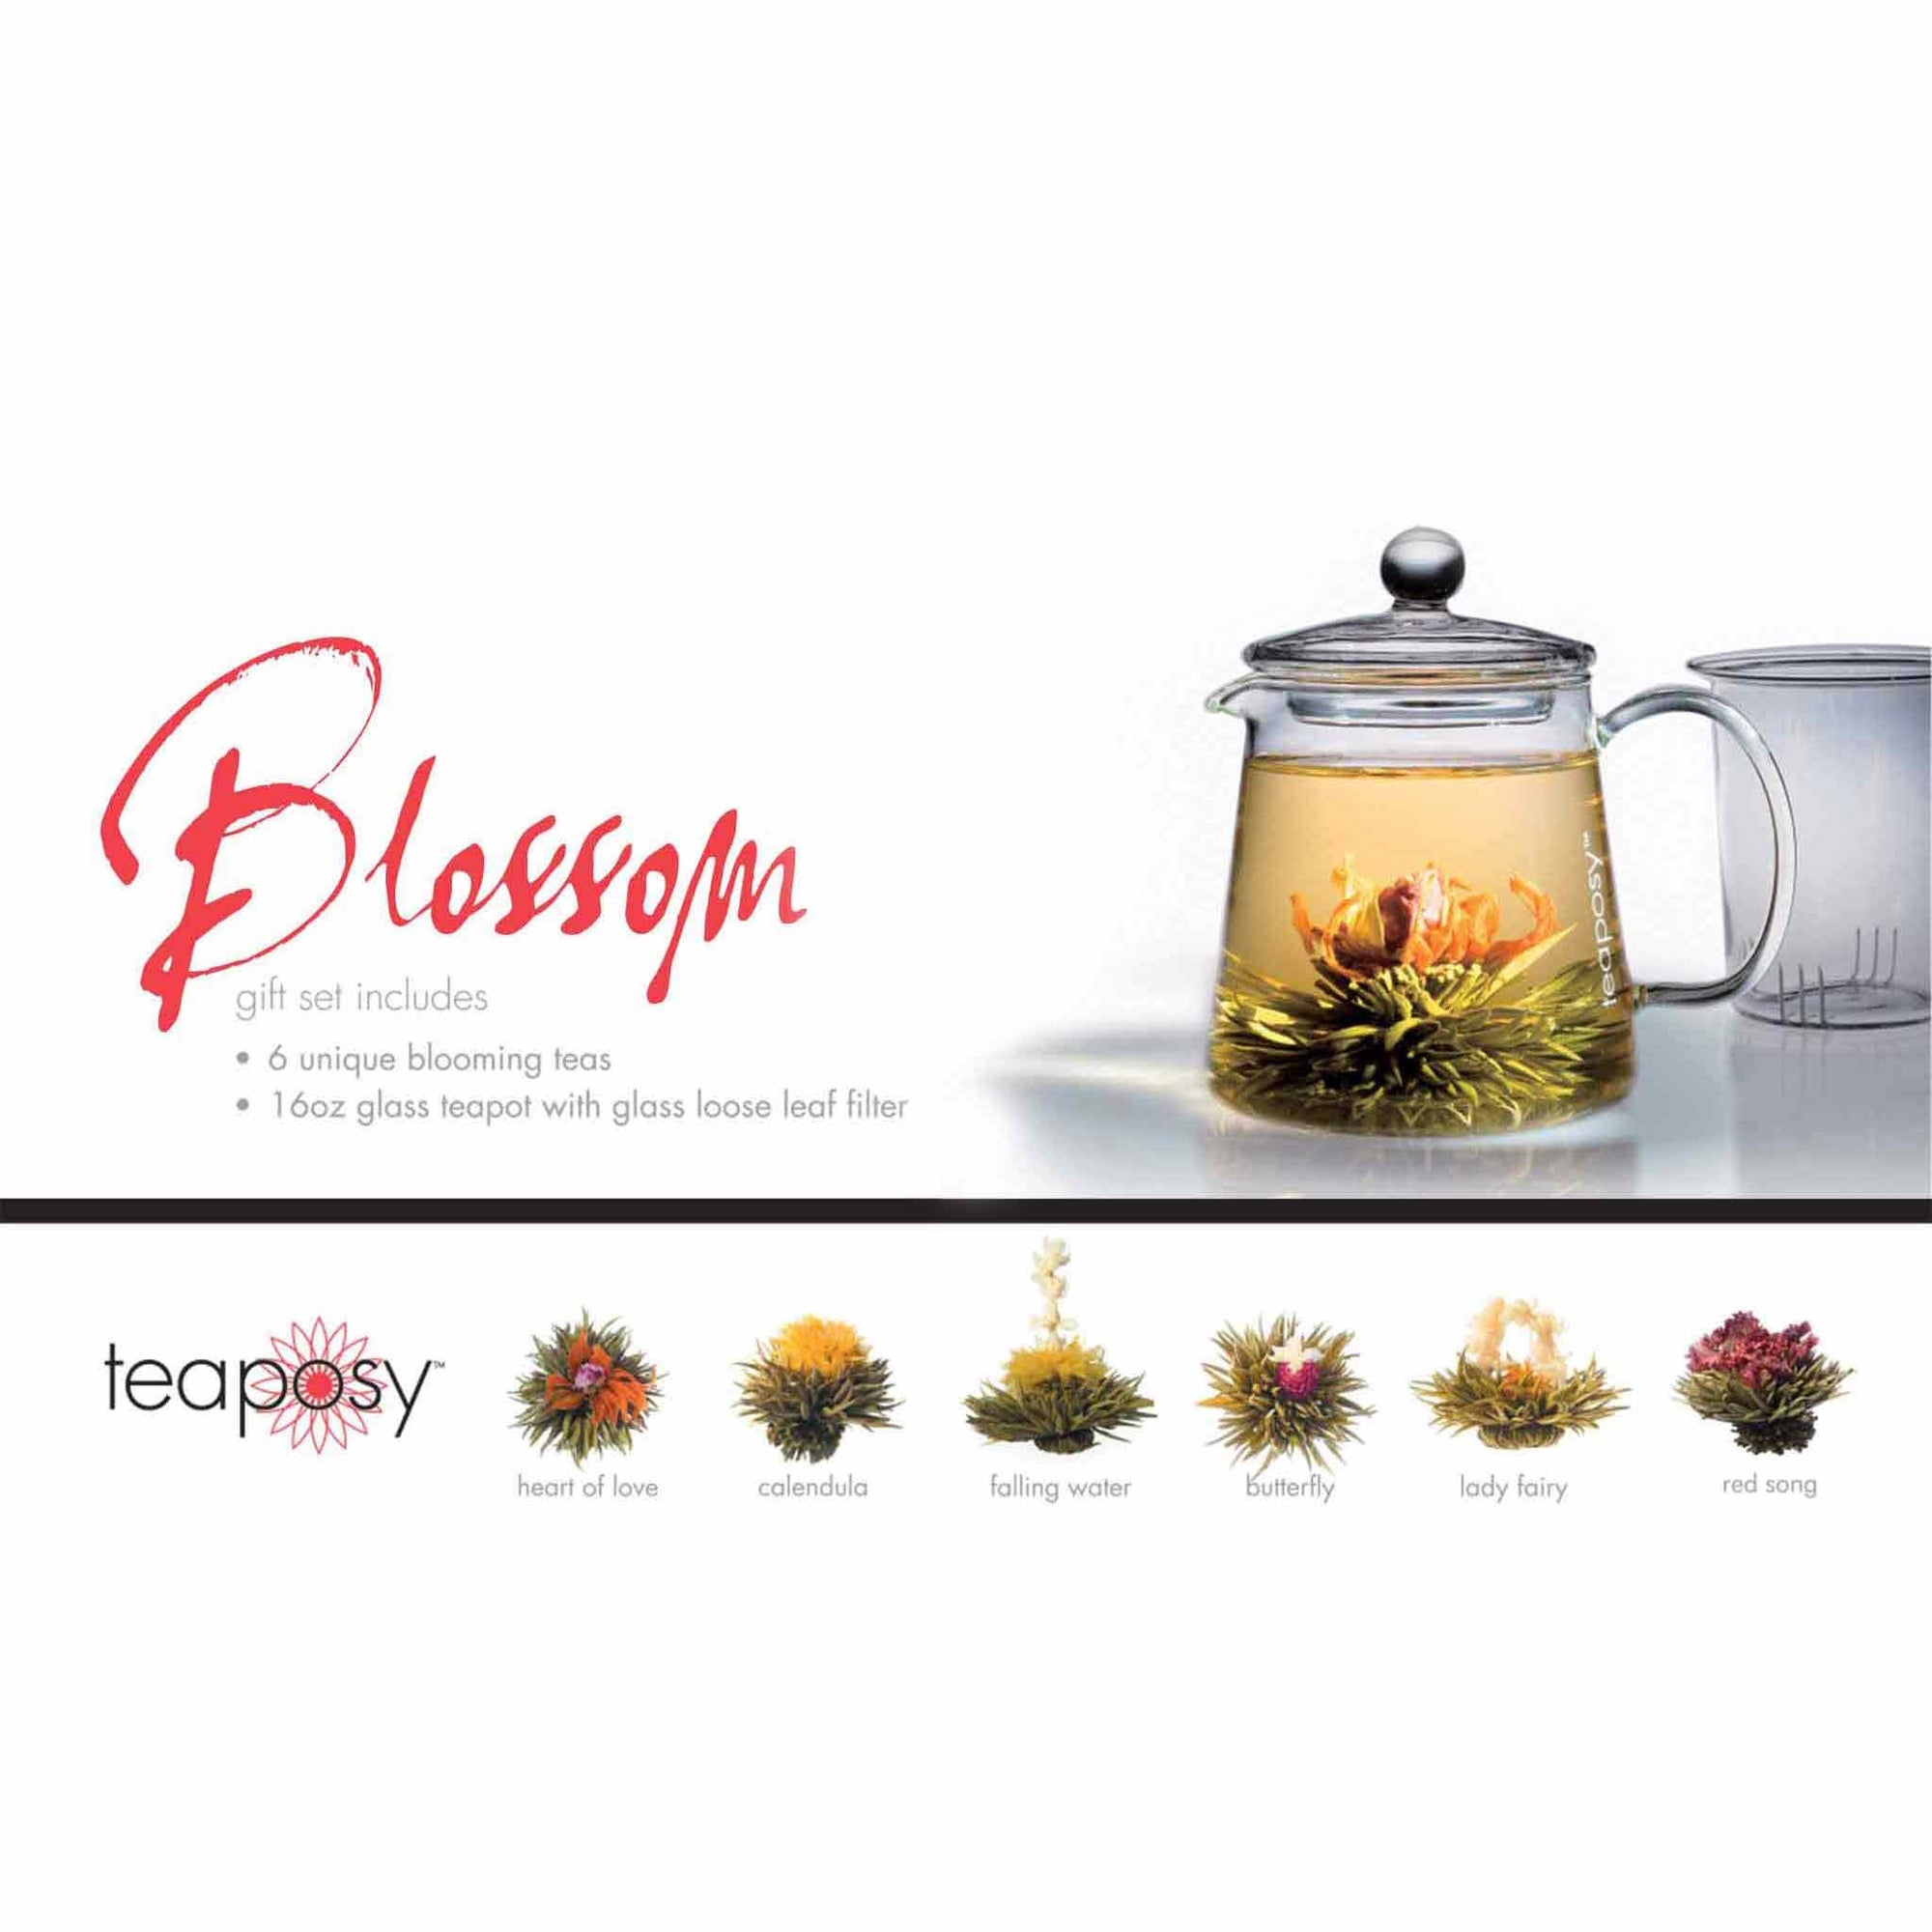 Teaposy blossom gift set showing six unique blooming teas with the tea-for-two glass teapot